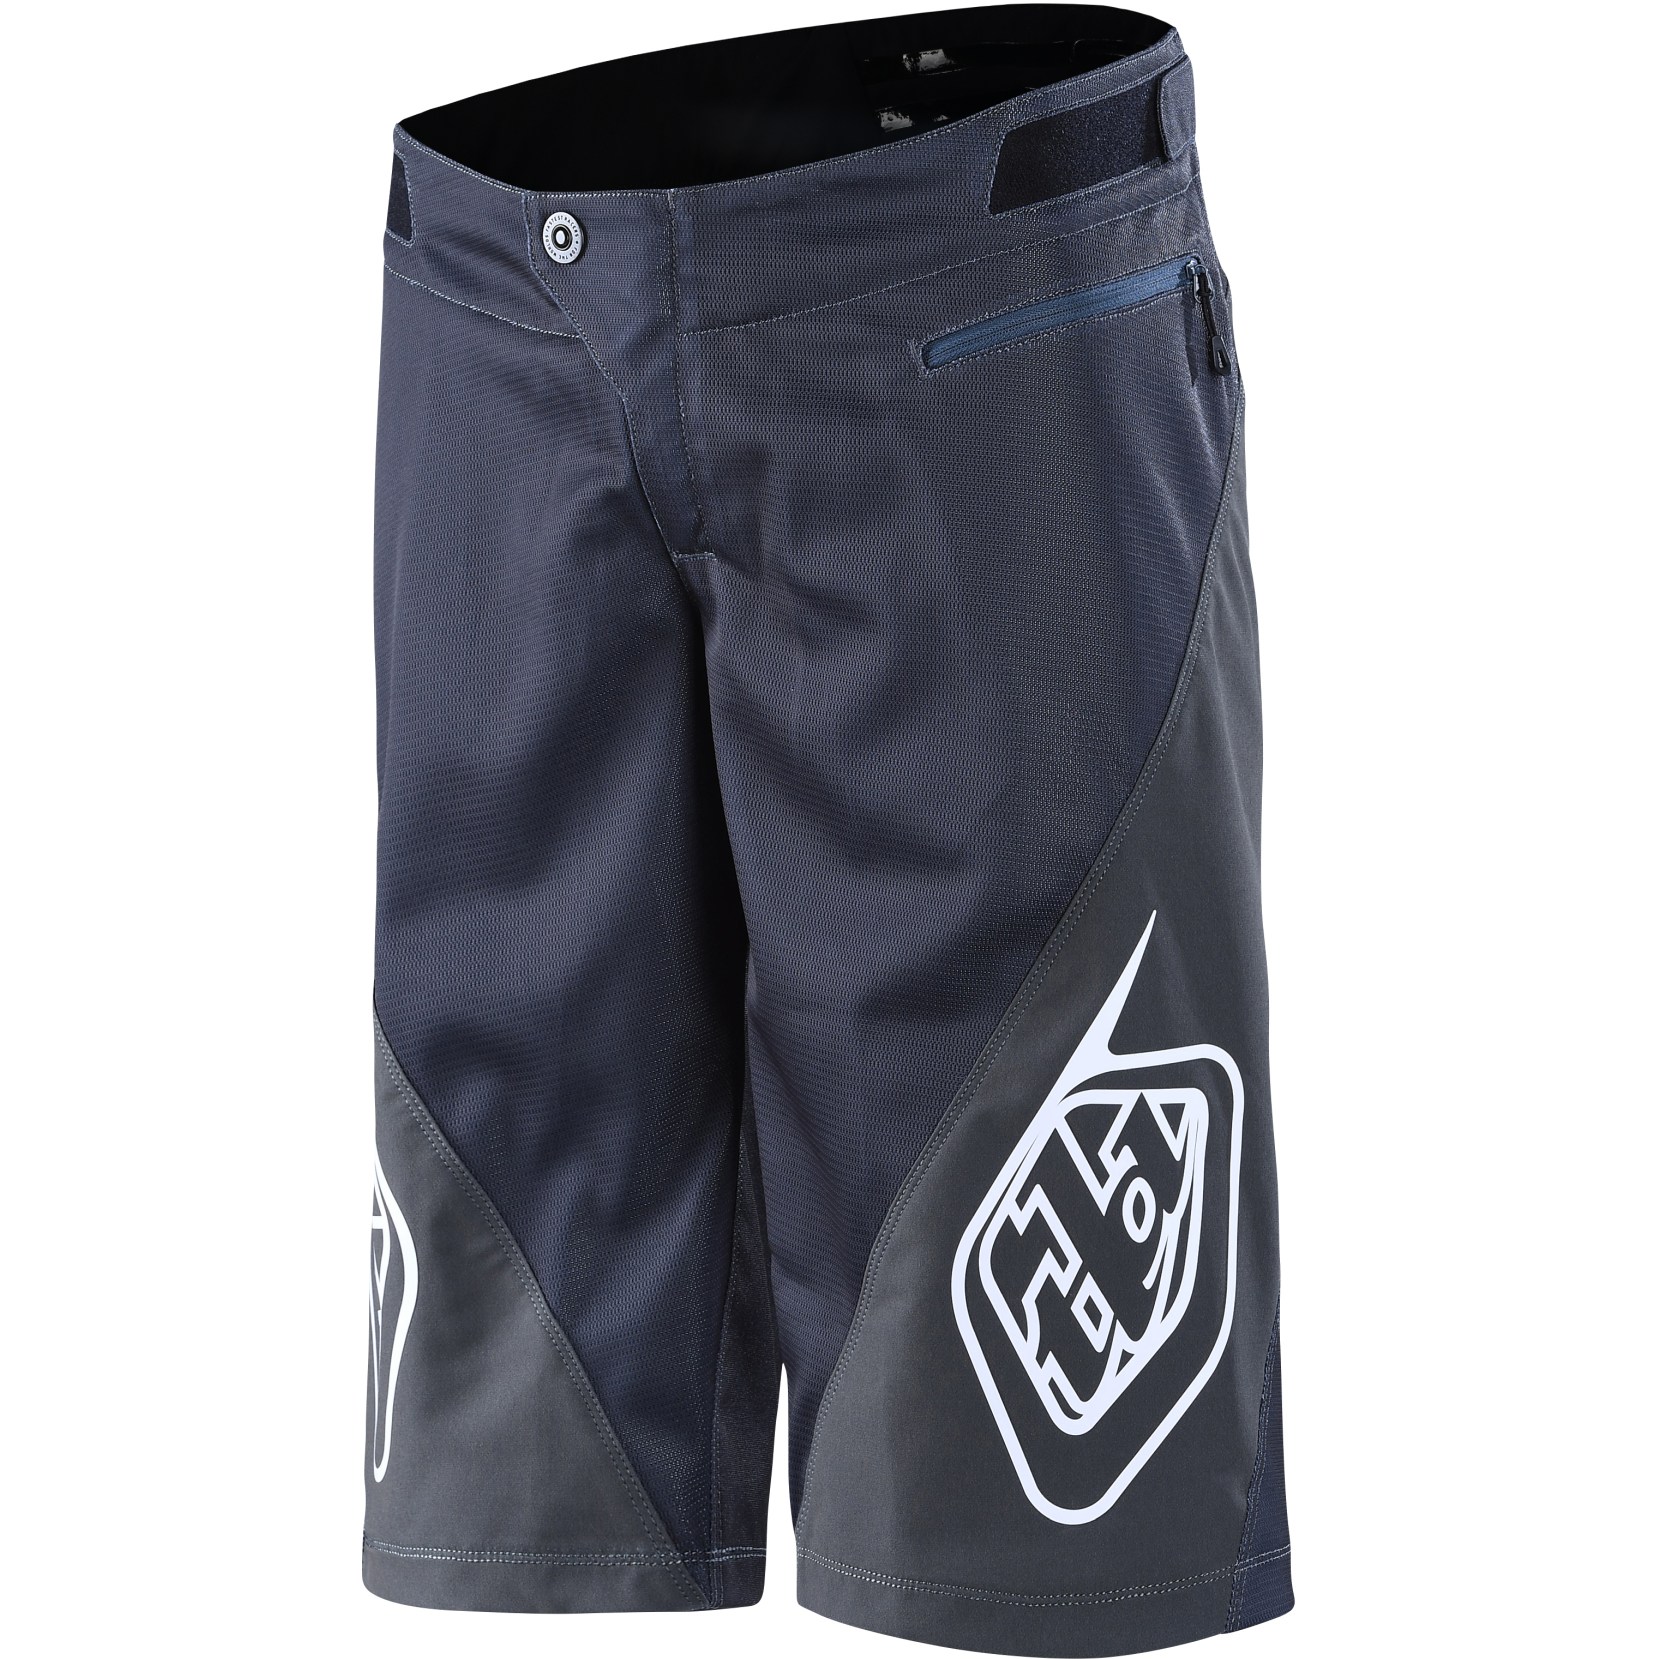 Productfoto van Troy Lee Designs Sprint Shorts - Solid Charcoal